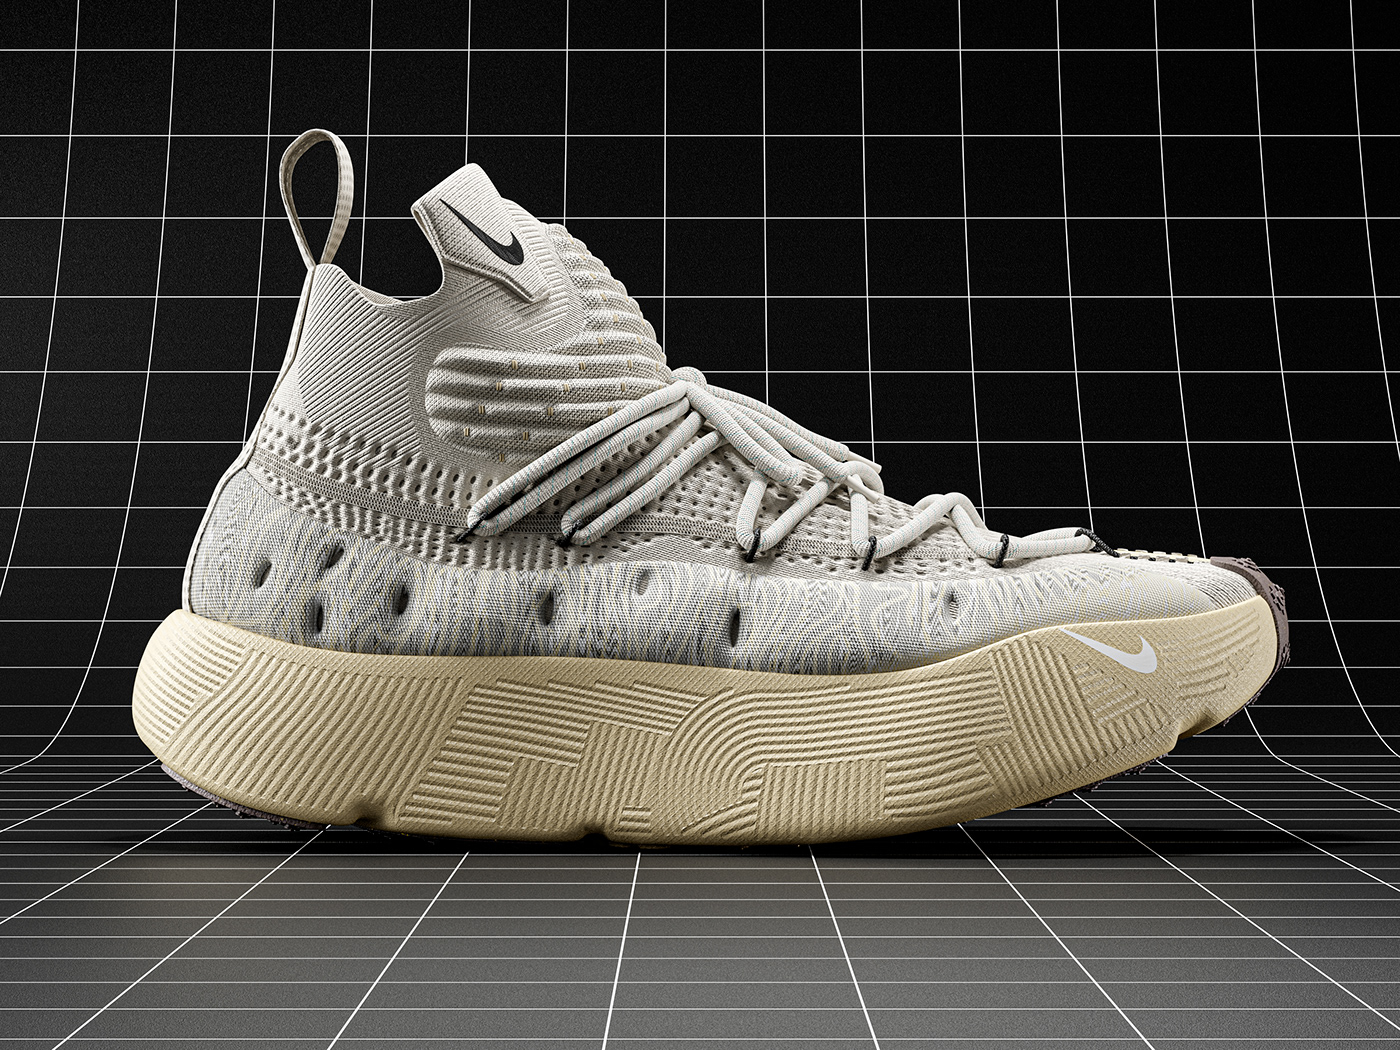 3D CGI Clothing Fashion  Render sneakers Style visualization